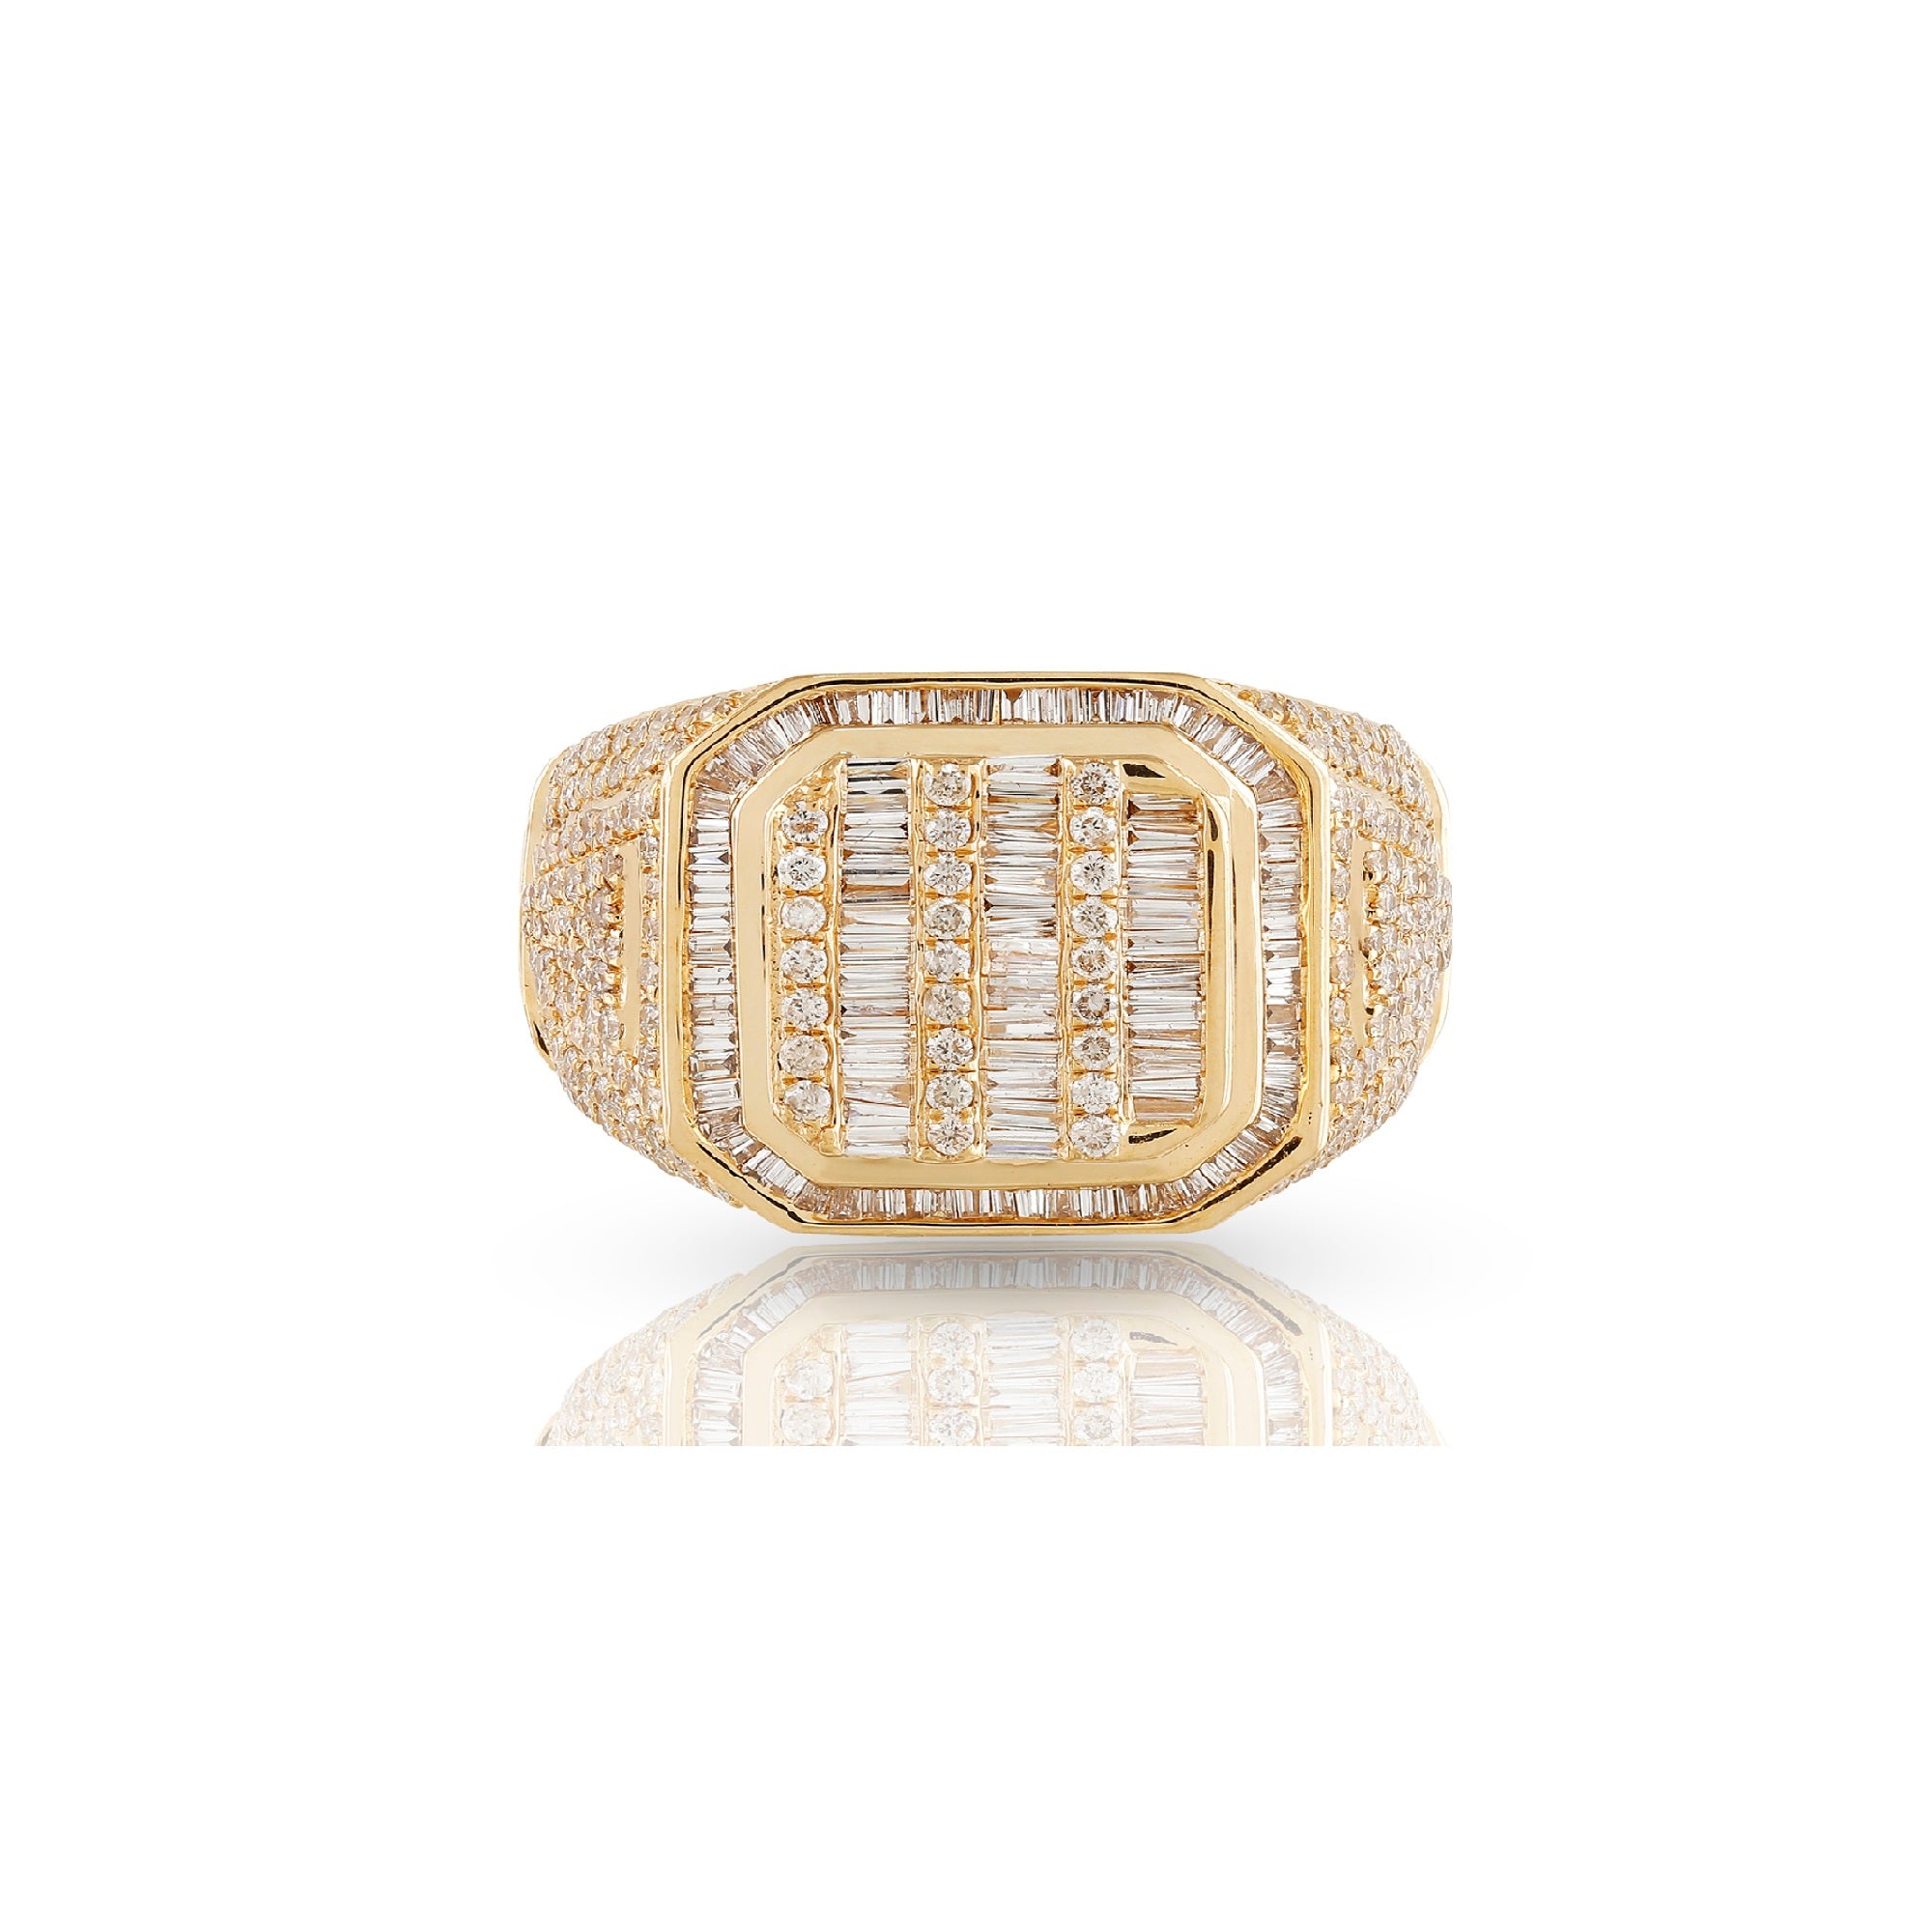 17mm Yellow Gold Baguette and Round Diamond Men's Ring by Rafaela Jewelry